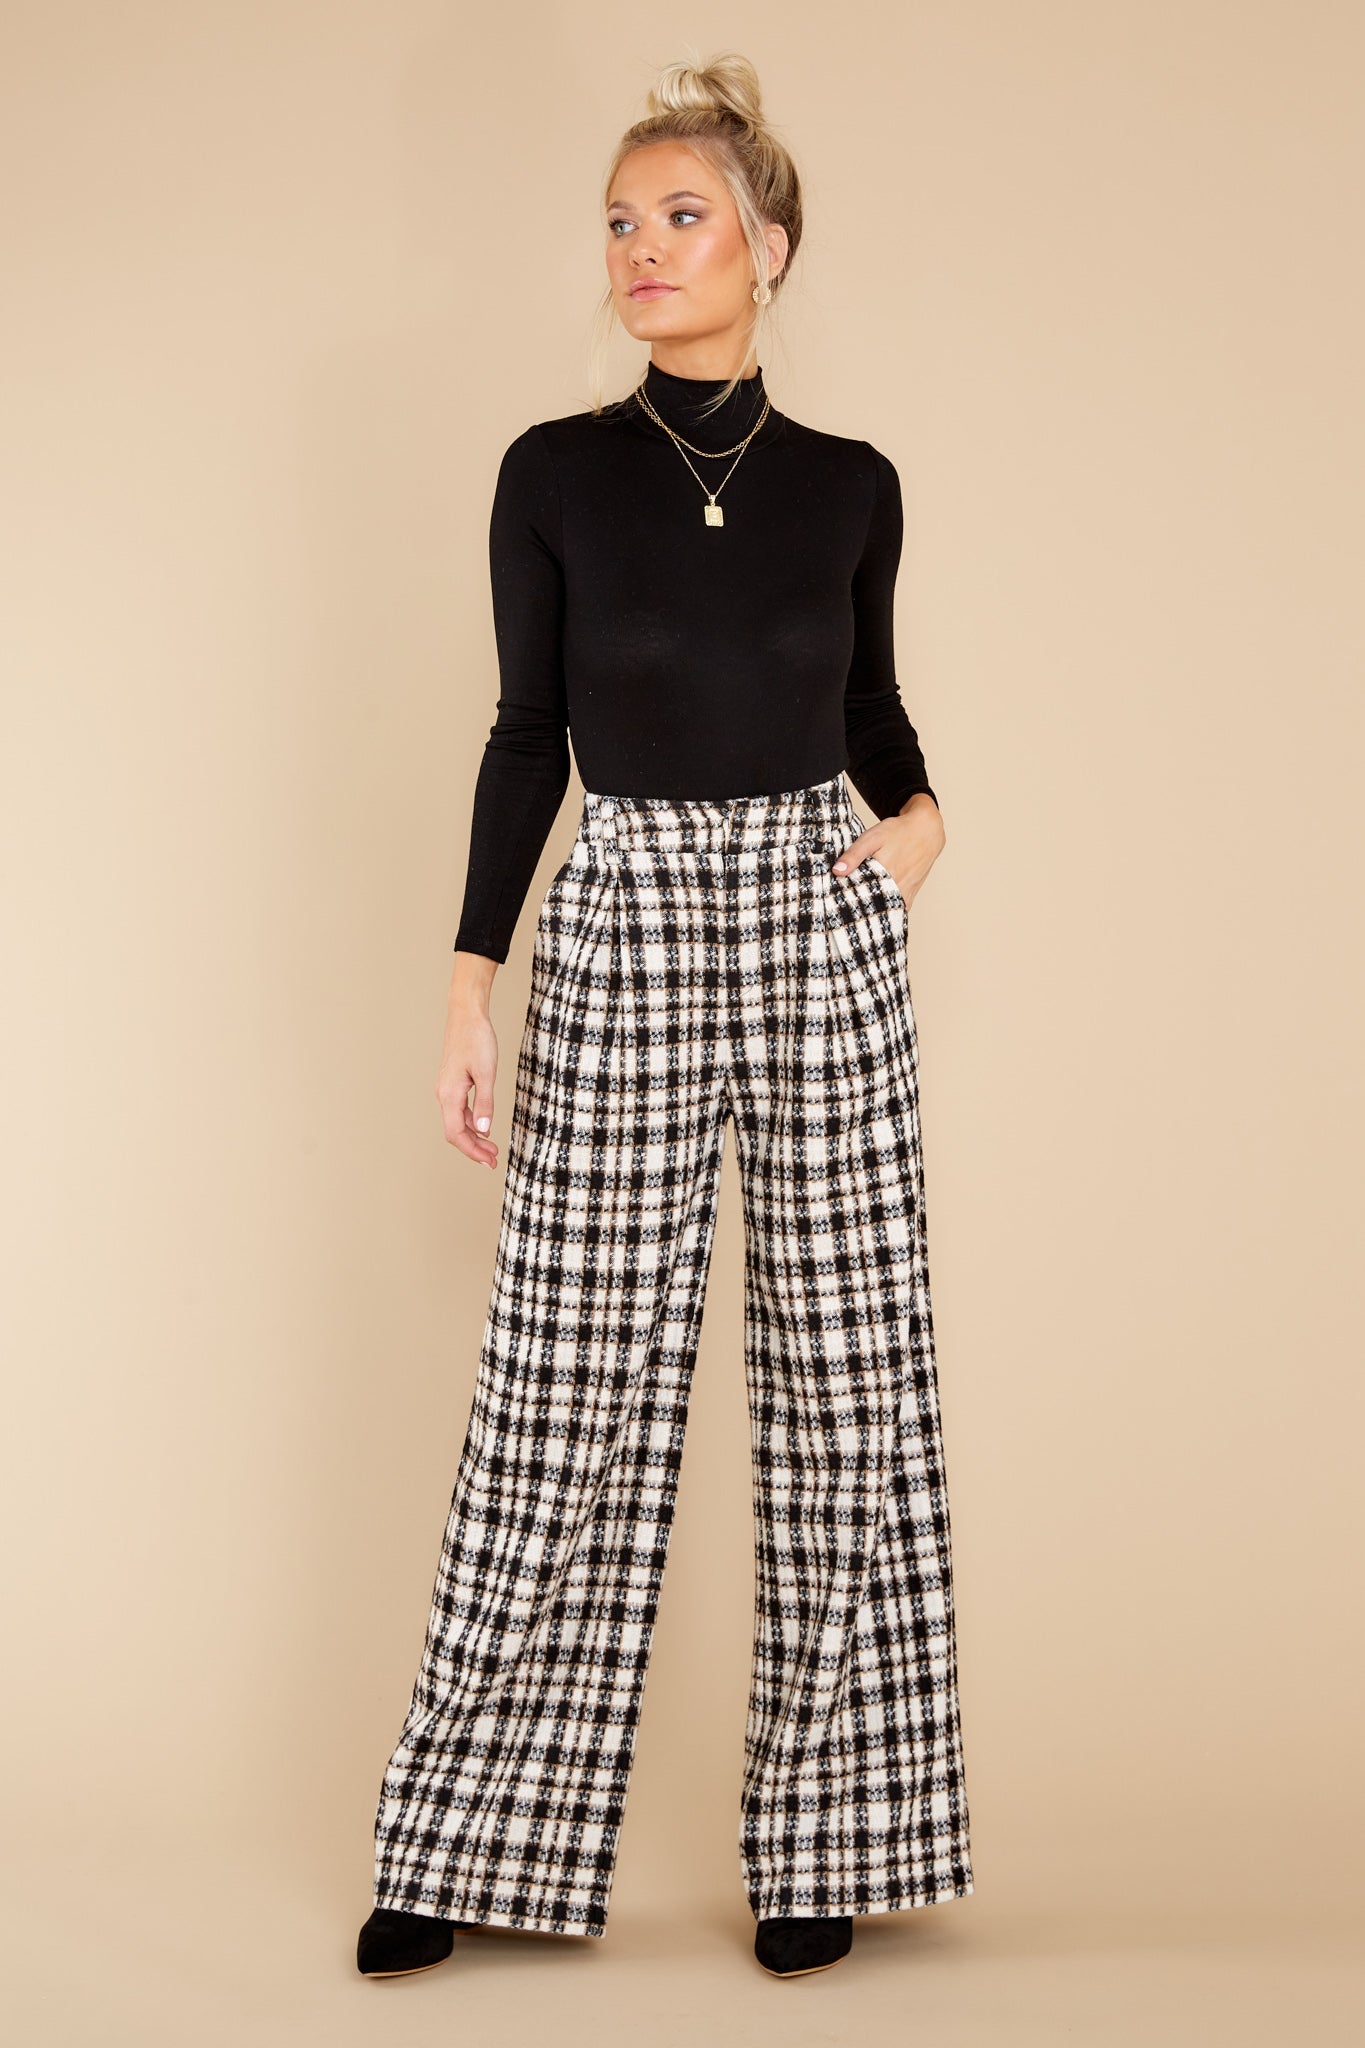 Adorable Black And White Plaid Pants - All Bottoms